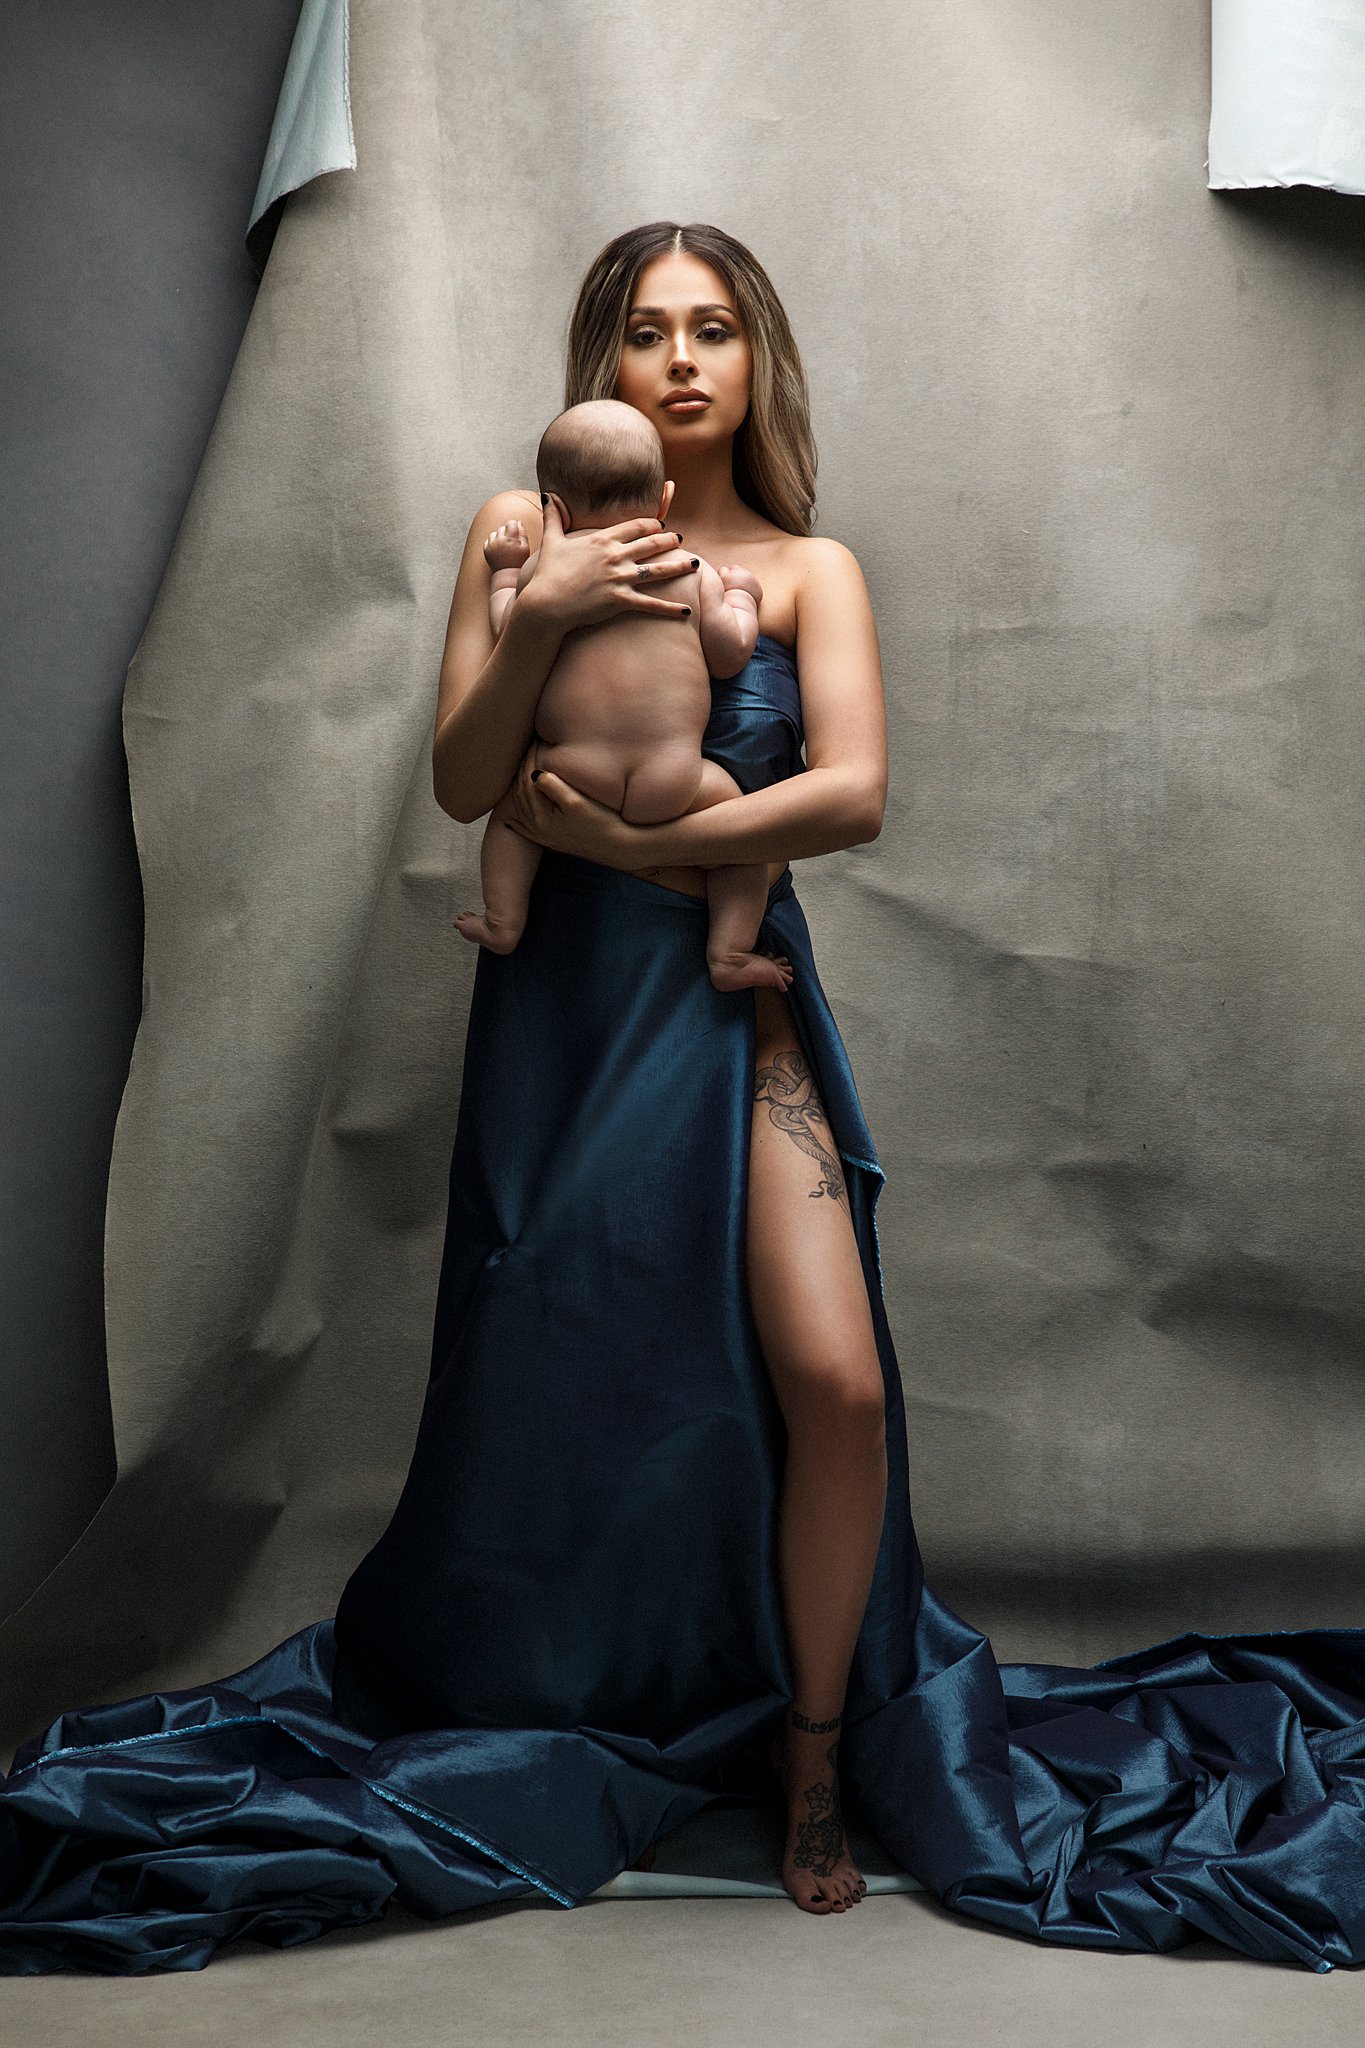 A new mother wears a blue fabric while holding her newborn baby against her chest namely newborns